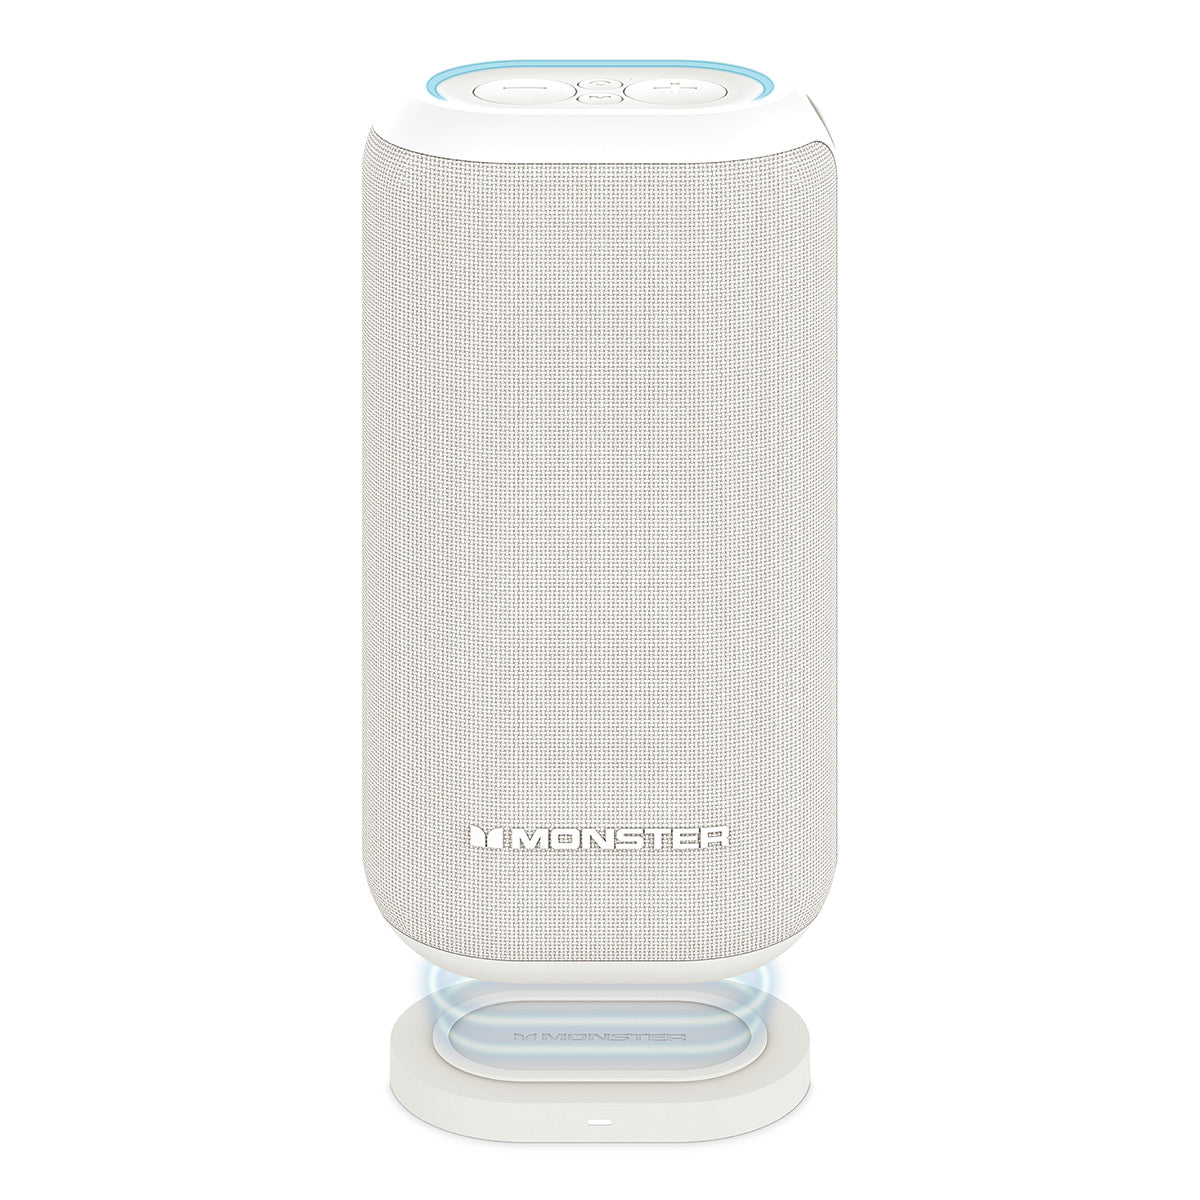 Monster DNA MAX Waterproof Bluetooth Speaker with IP67 Rating, Qi Wireless Charging Pad, and USB-C Charge Out Capability (White)